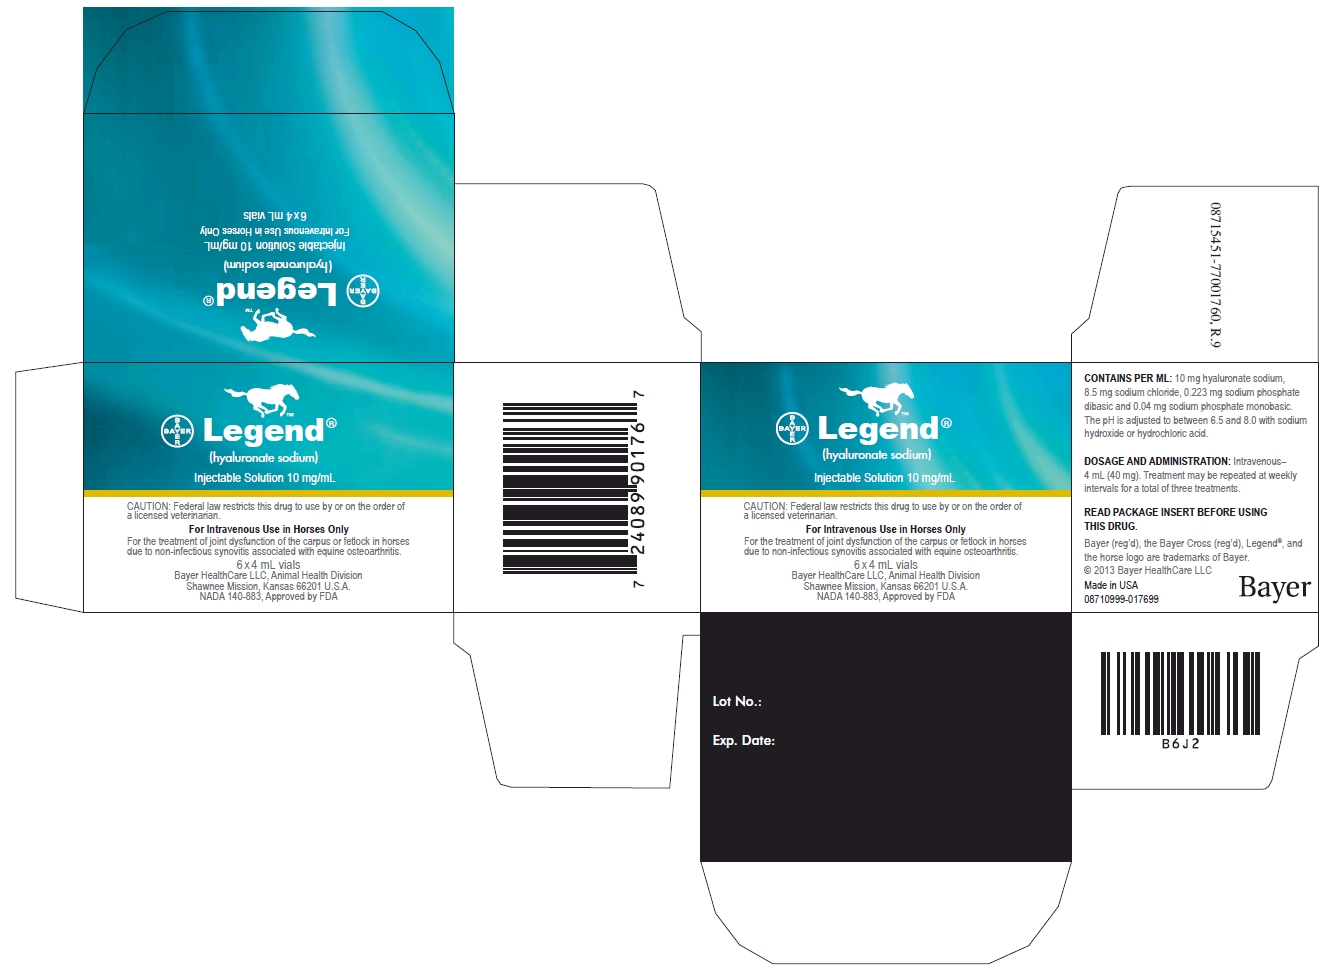 Legend (hyaluronate sodium) Injectable Solution 10 mg/mL carton label